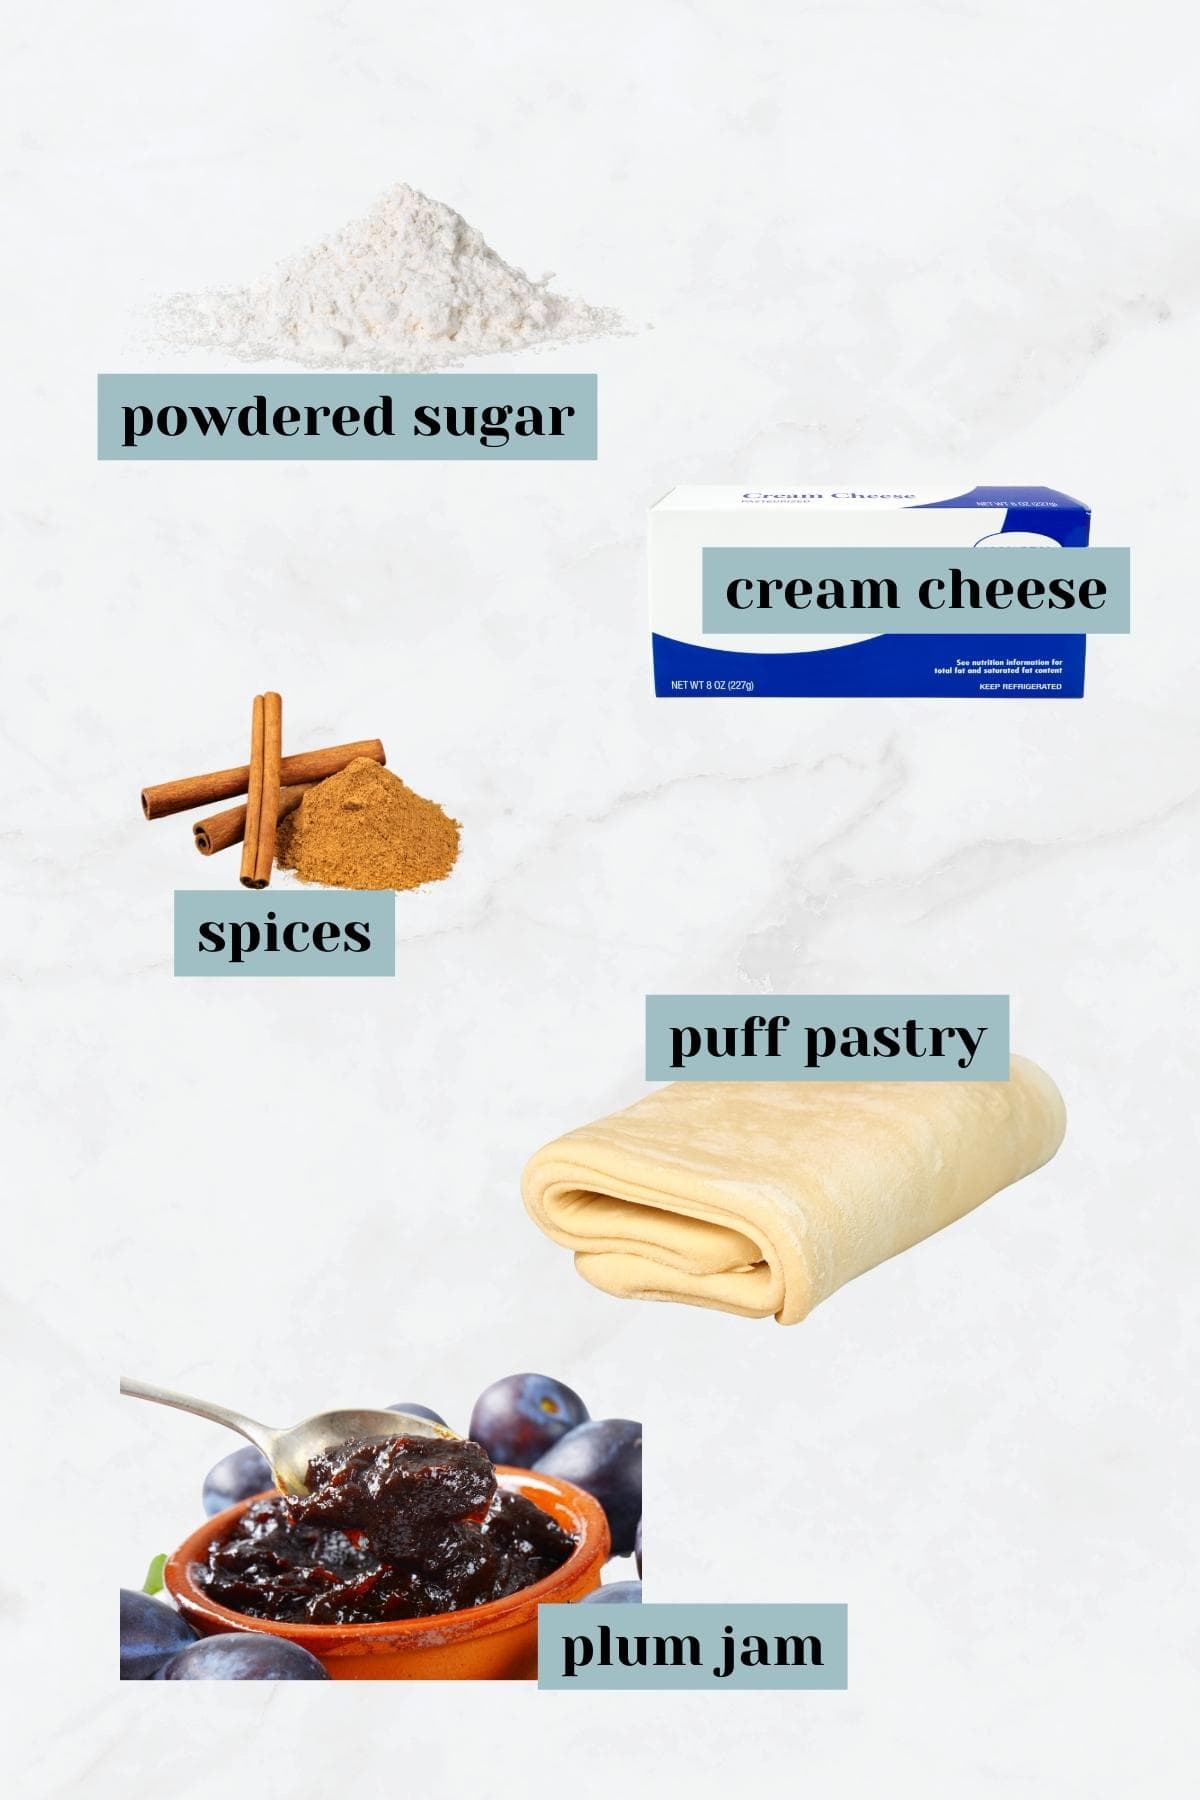 A list of ingredients for a plum danish.